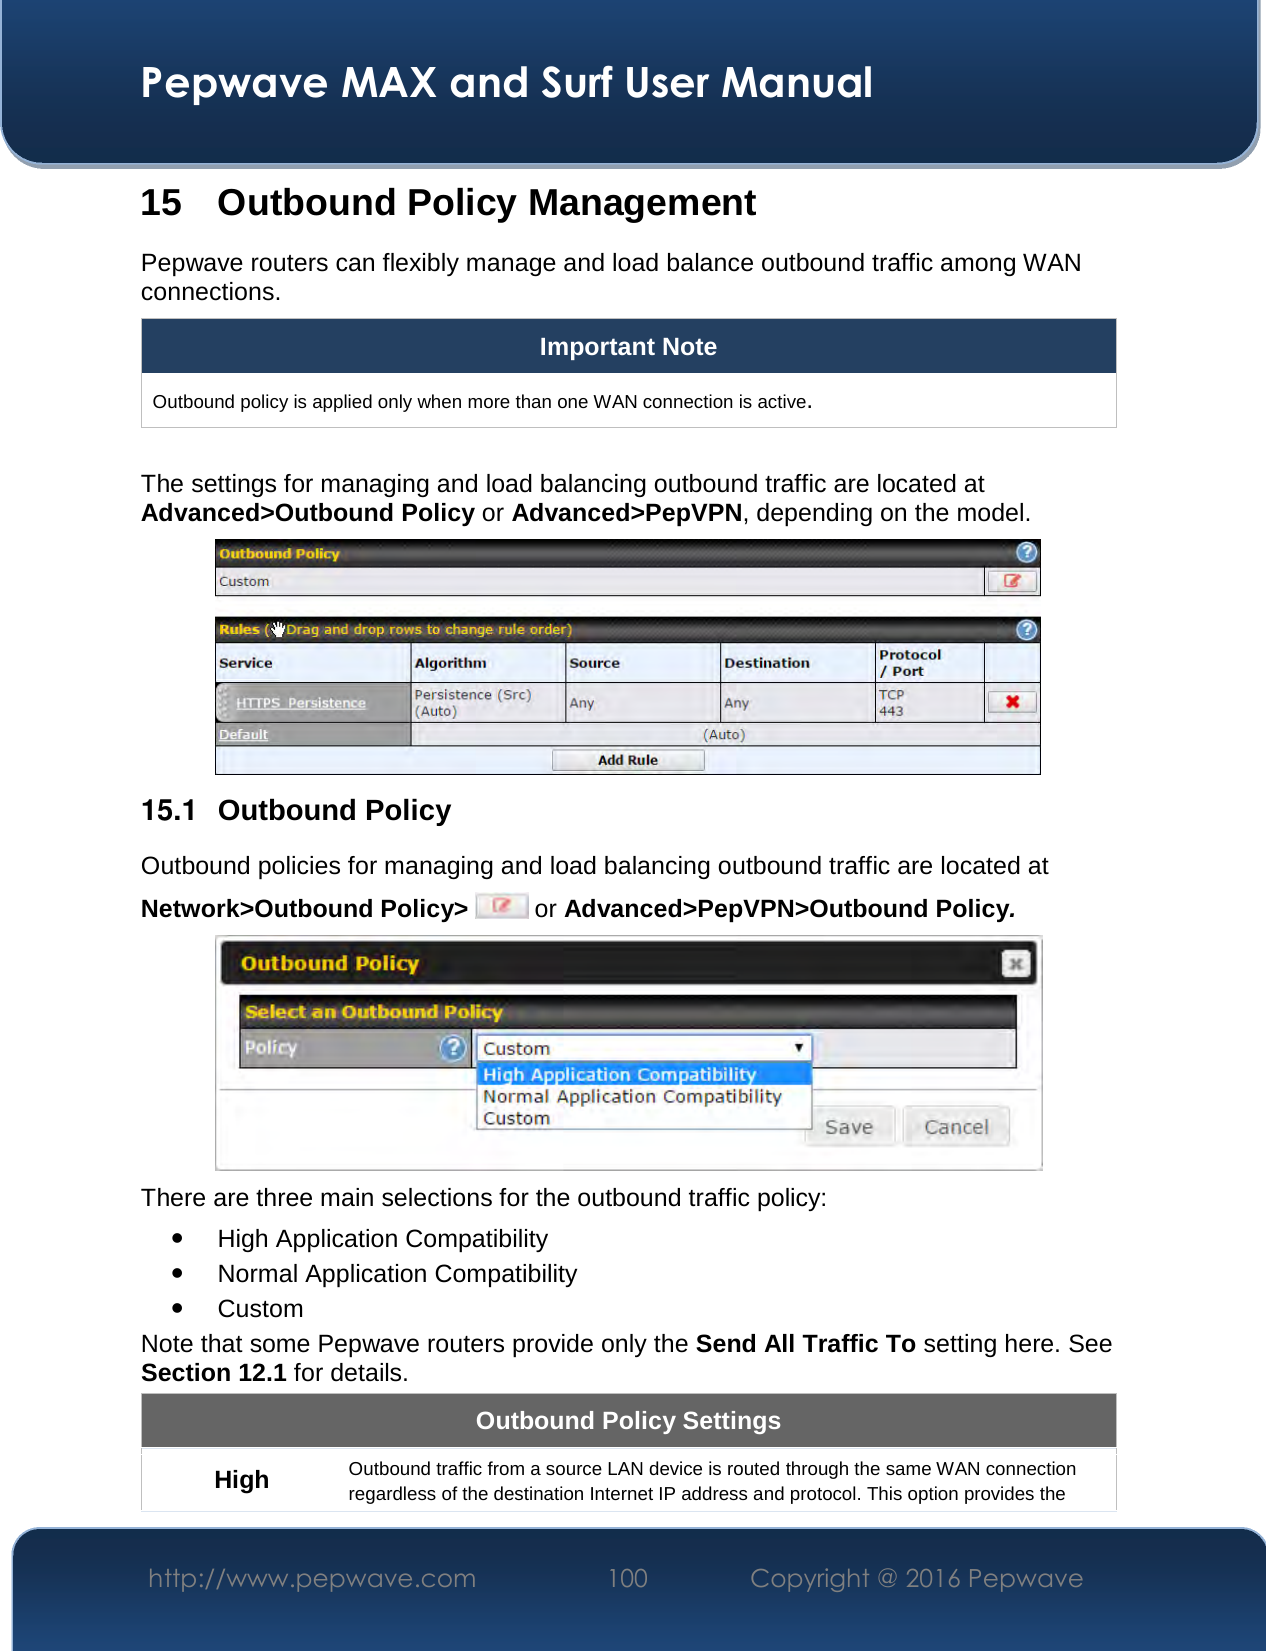  Pepwave MAX and Surf User Manual http://www.pepwave.com  100    Copyright @ 2016 Pepwave   15 Outbound Policy Management Pepwave routers can flexibly manage and load balance outbound traffic among WAN connections.  Important Note Outbound policy is applied only when more than one WAN connection is active.  The settings for managing and load balancing outbound traffic are located at Advanced&gt;Outbound Policy or Advanced&gt;PepVPN, depending on the model.  15.1  Outbound Policy Outbound policies for managing and load balancing outbound traffic are located at Network&gt;Outbound Policy&gt;  or Advanced&gt;PepVPN&gt;Outbound Policy.  There are three main selections for the outbound traffic policy:  High Application Compatibility  Normal Application Compatibility  Custom  Note that some Pepwave routers provide only the Send All Traffic To setting here. See Section 12.1 for details.  Outbound Policy Settings High  Outbound traffic from a source LAN device is routed through the same WAN connection regardless of the destination Internet IP address and protocol. This option provides the 